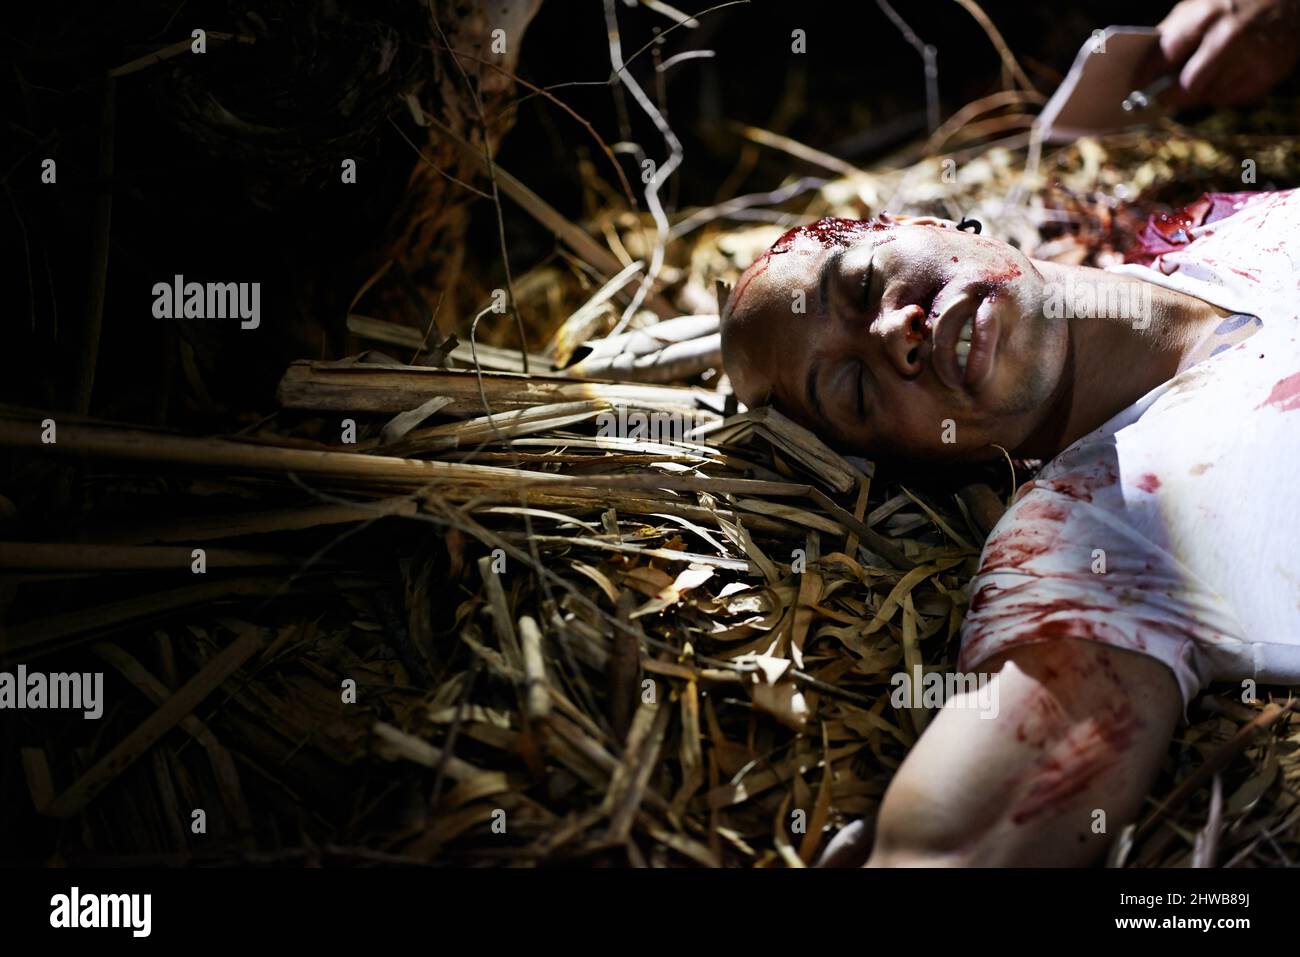 Victim of a tragedy. A cropped shot of a murder victim found outdoors. Stock Photo